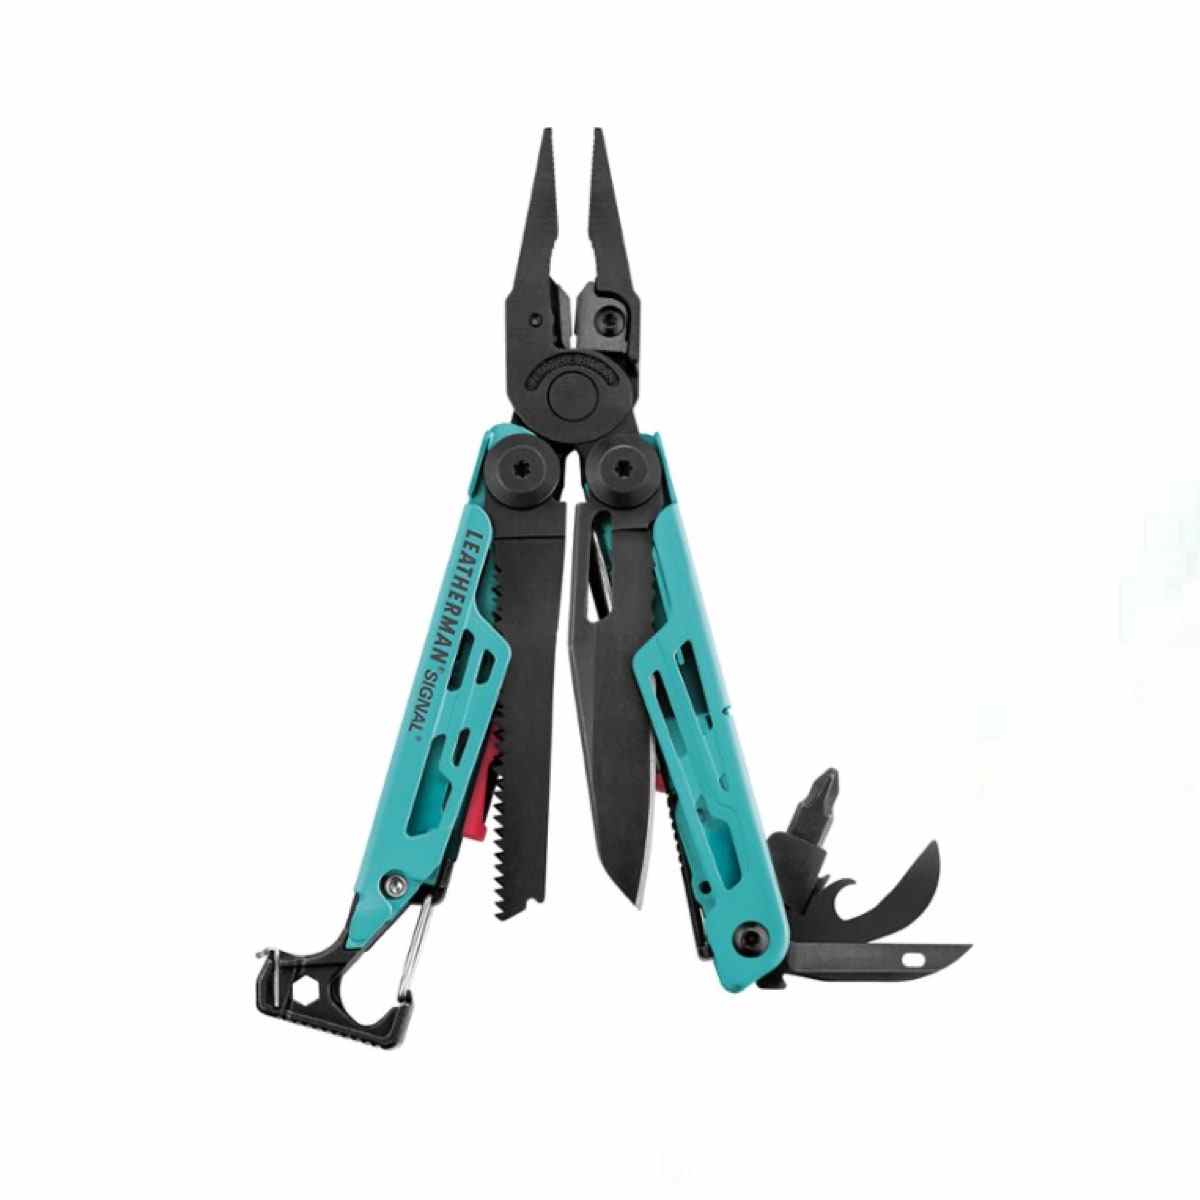 Turquoise and black Leatherman Signal Colors Multi-Tool on white background